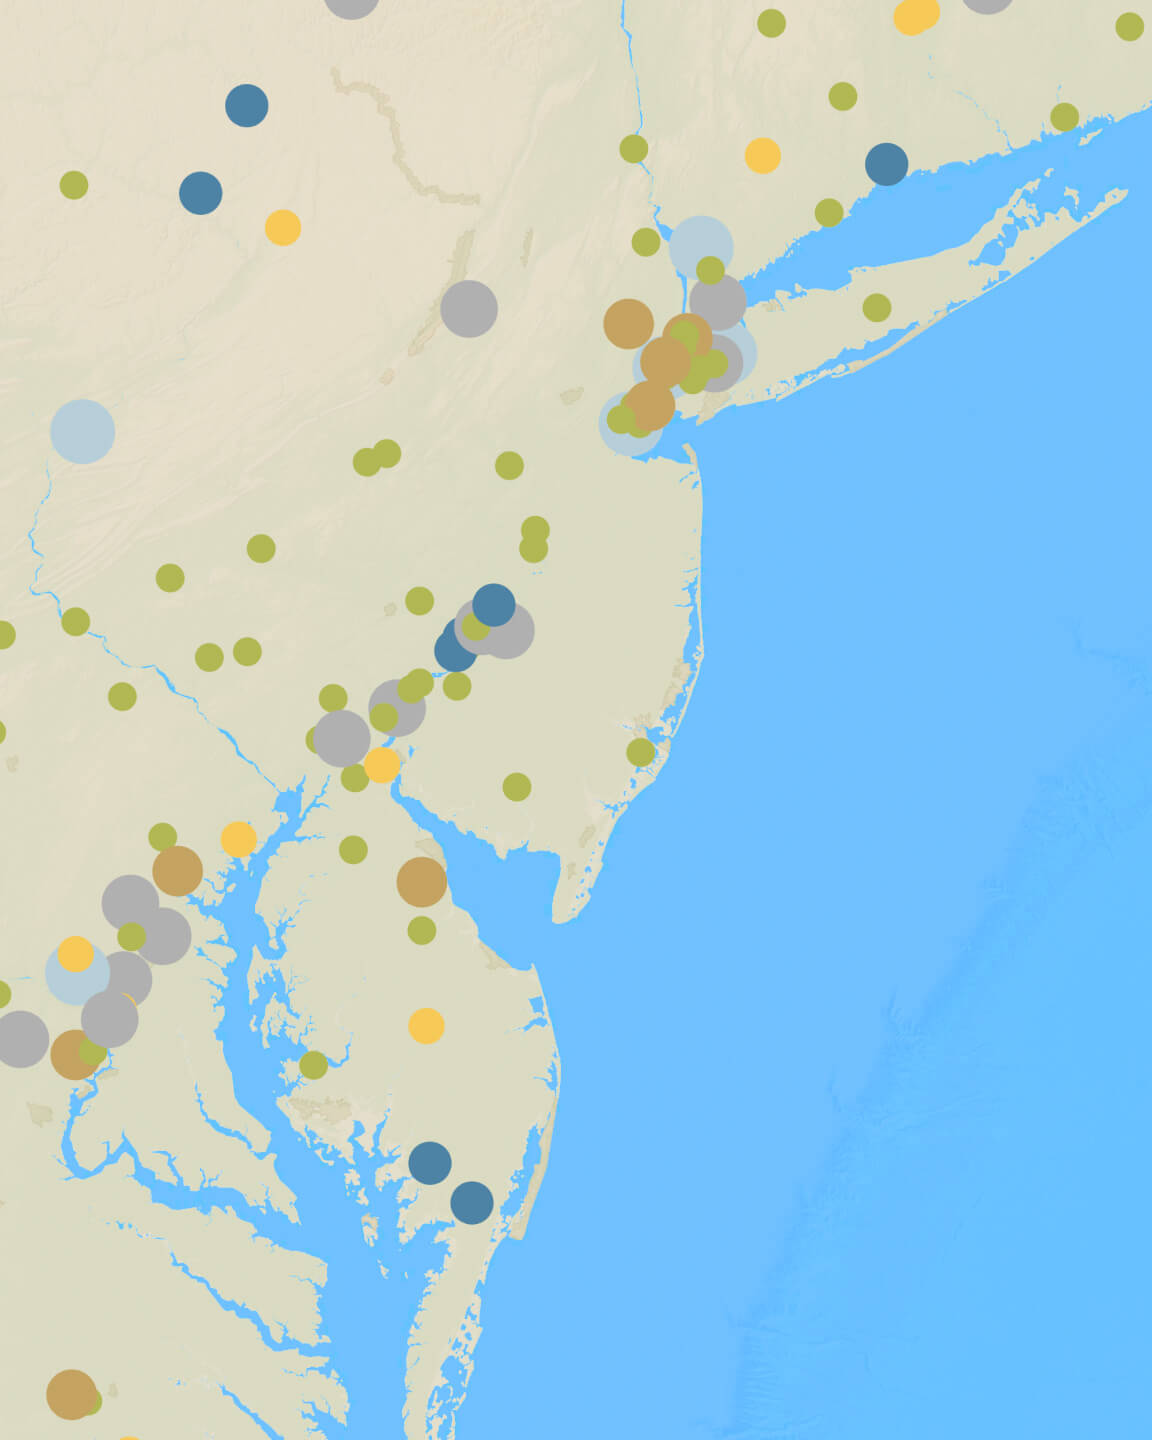 Map depicting air quality along the East Coast of the US with circular density representations